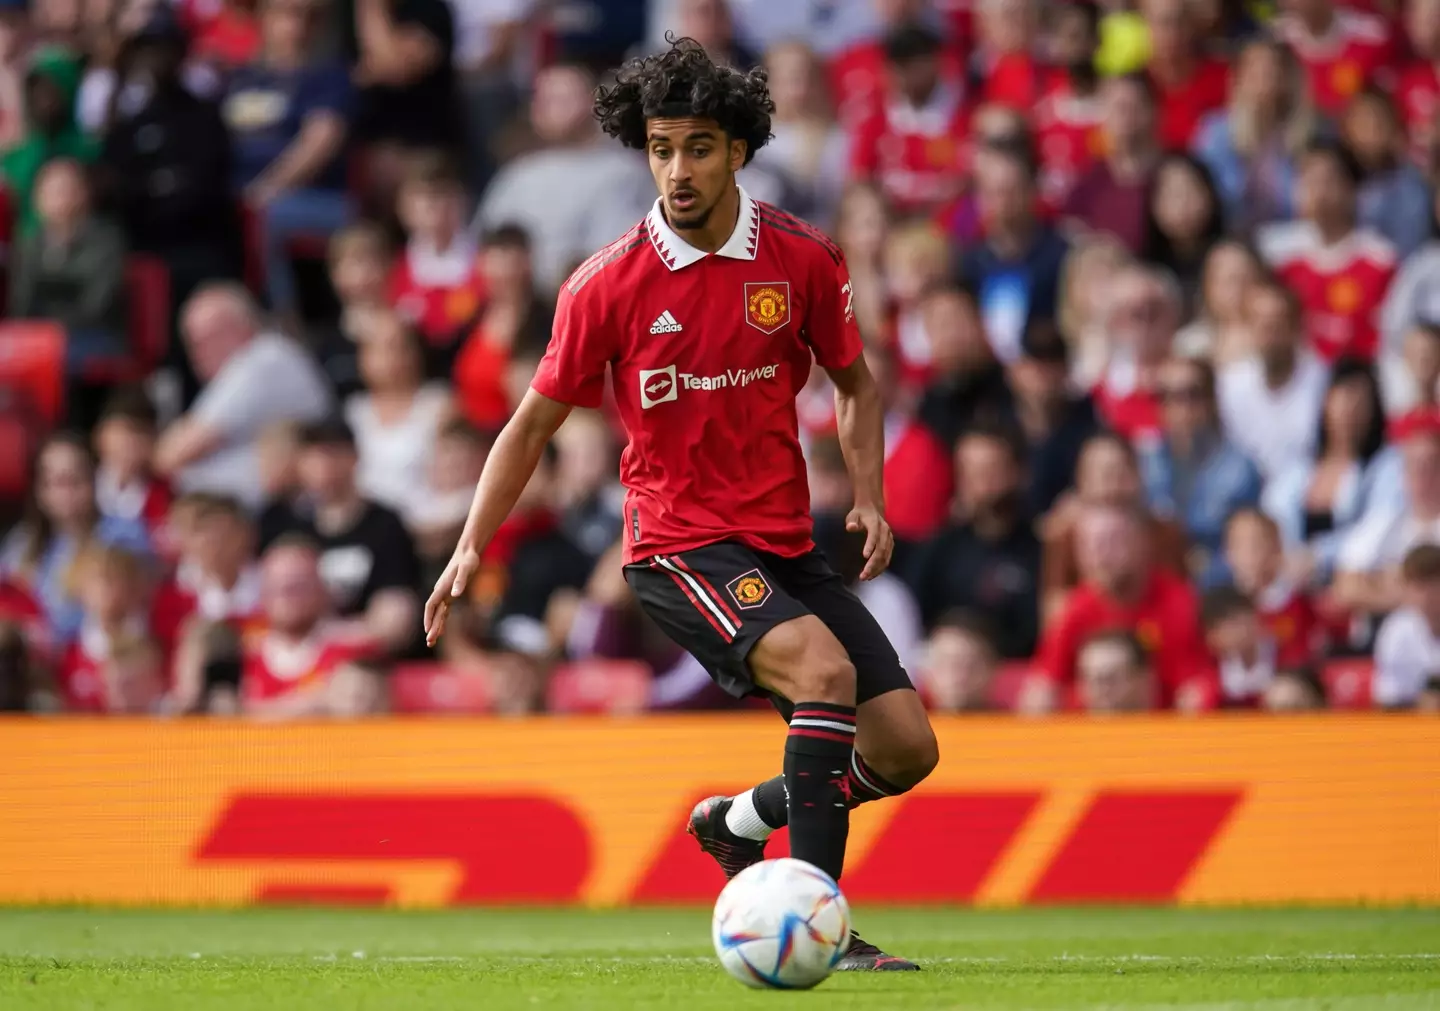 Iqbal playing for United in a pre-season friendly last year. Image: Alamy